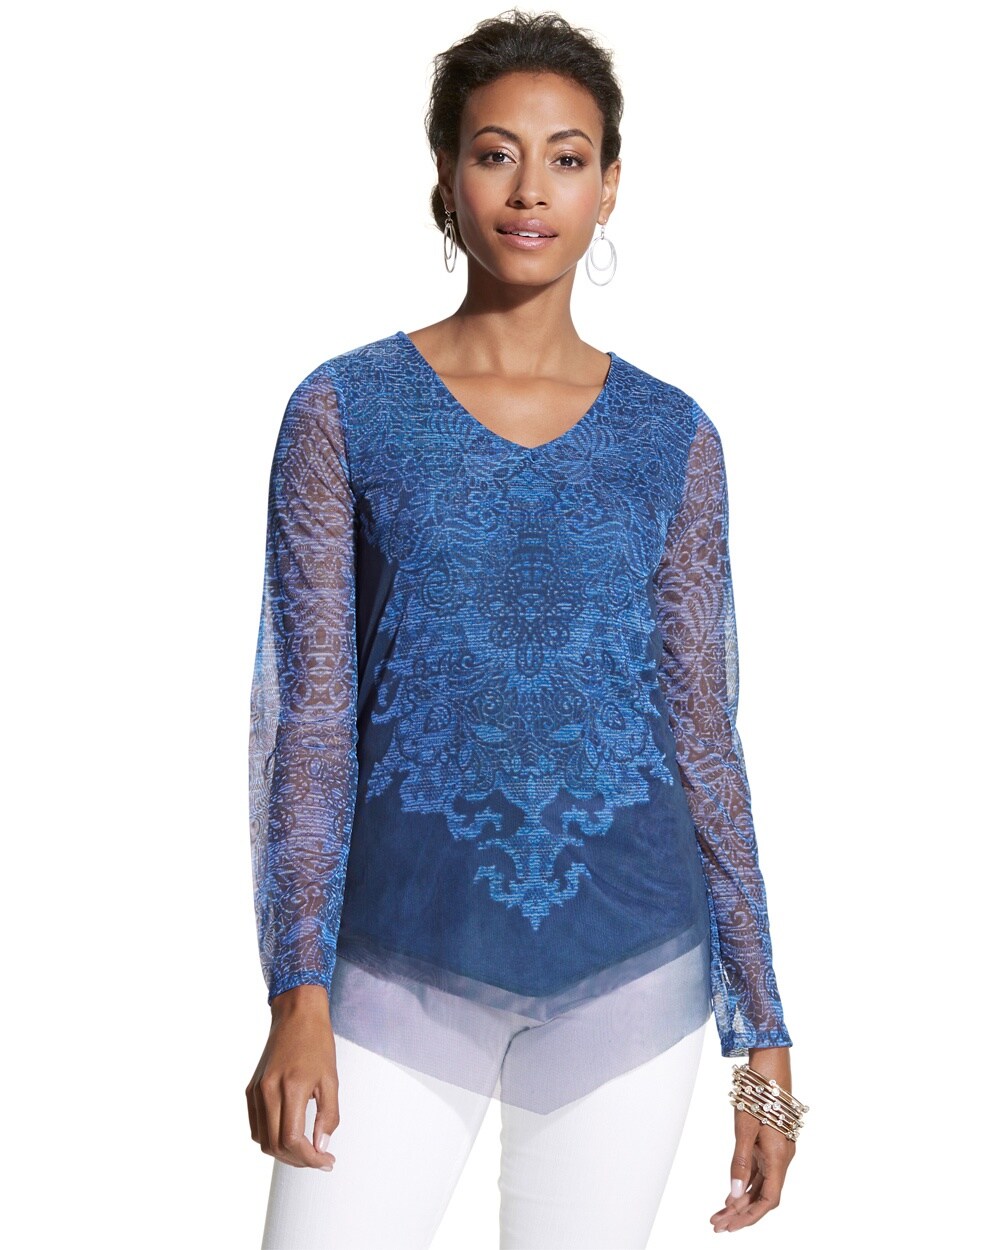 Textured Lace Charm Top